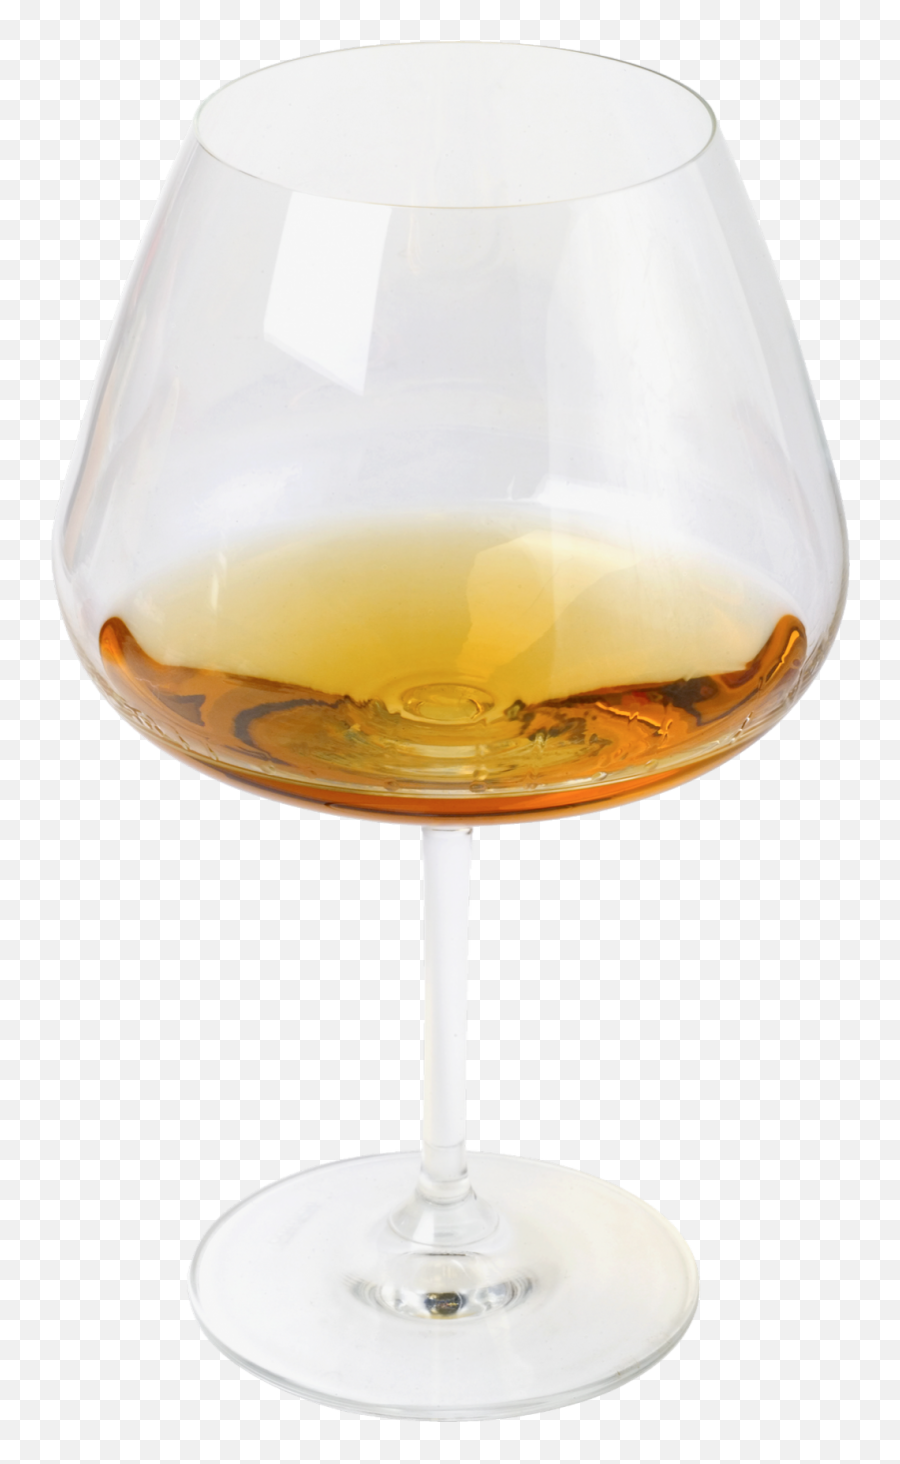 Wine Glass Png Image - Purepng Free Transparent Cc0 Png Champagne Stemware,Cocktail Glass Png